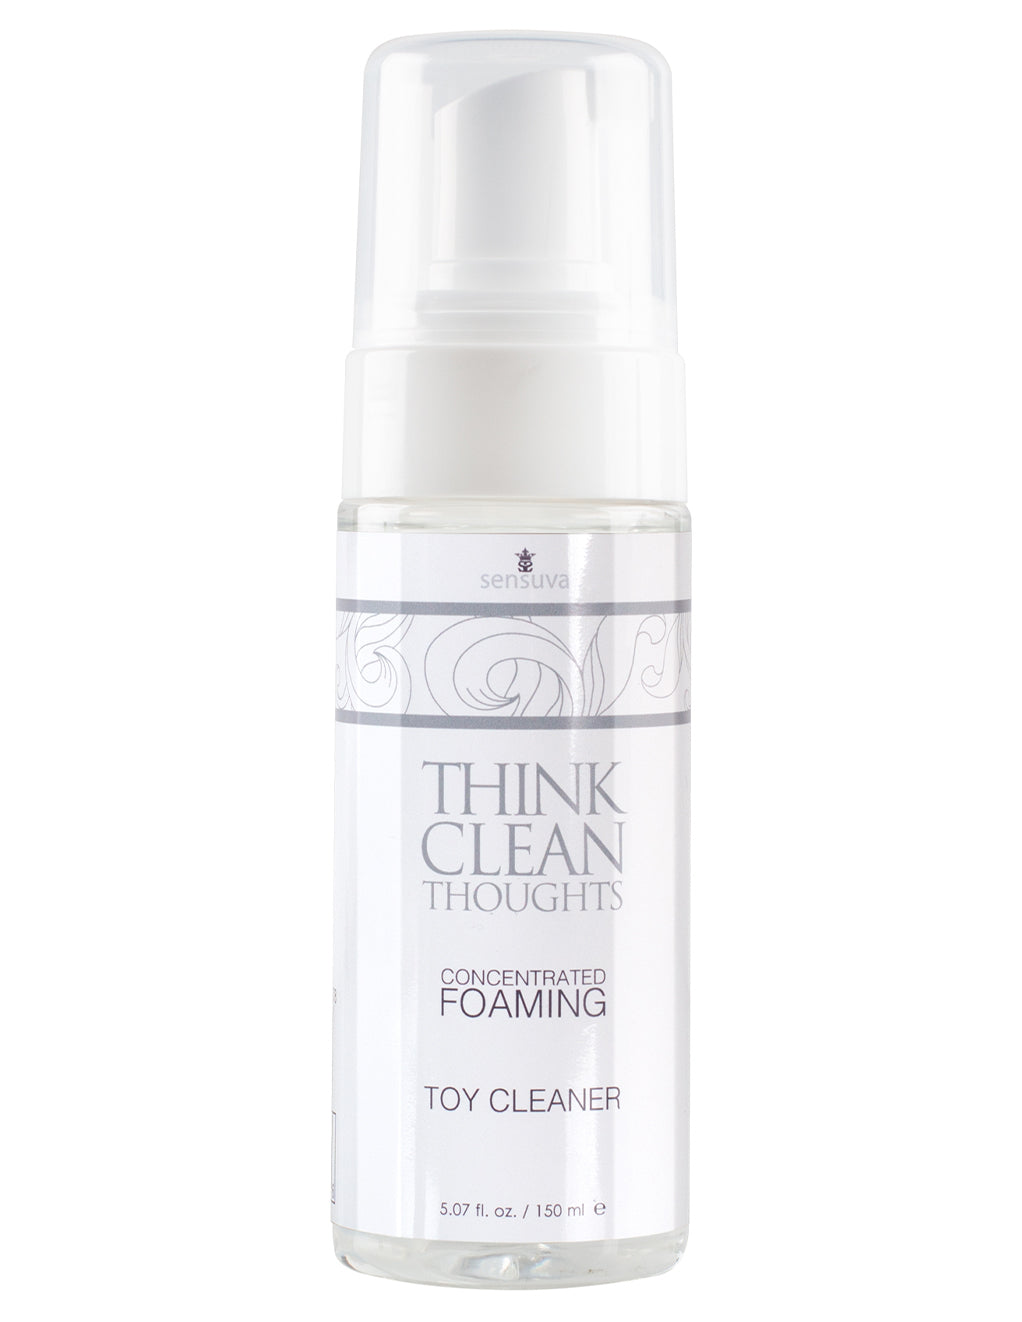 Sensuva Think Clean Thoughts Foaming Toy Cleaner- front